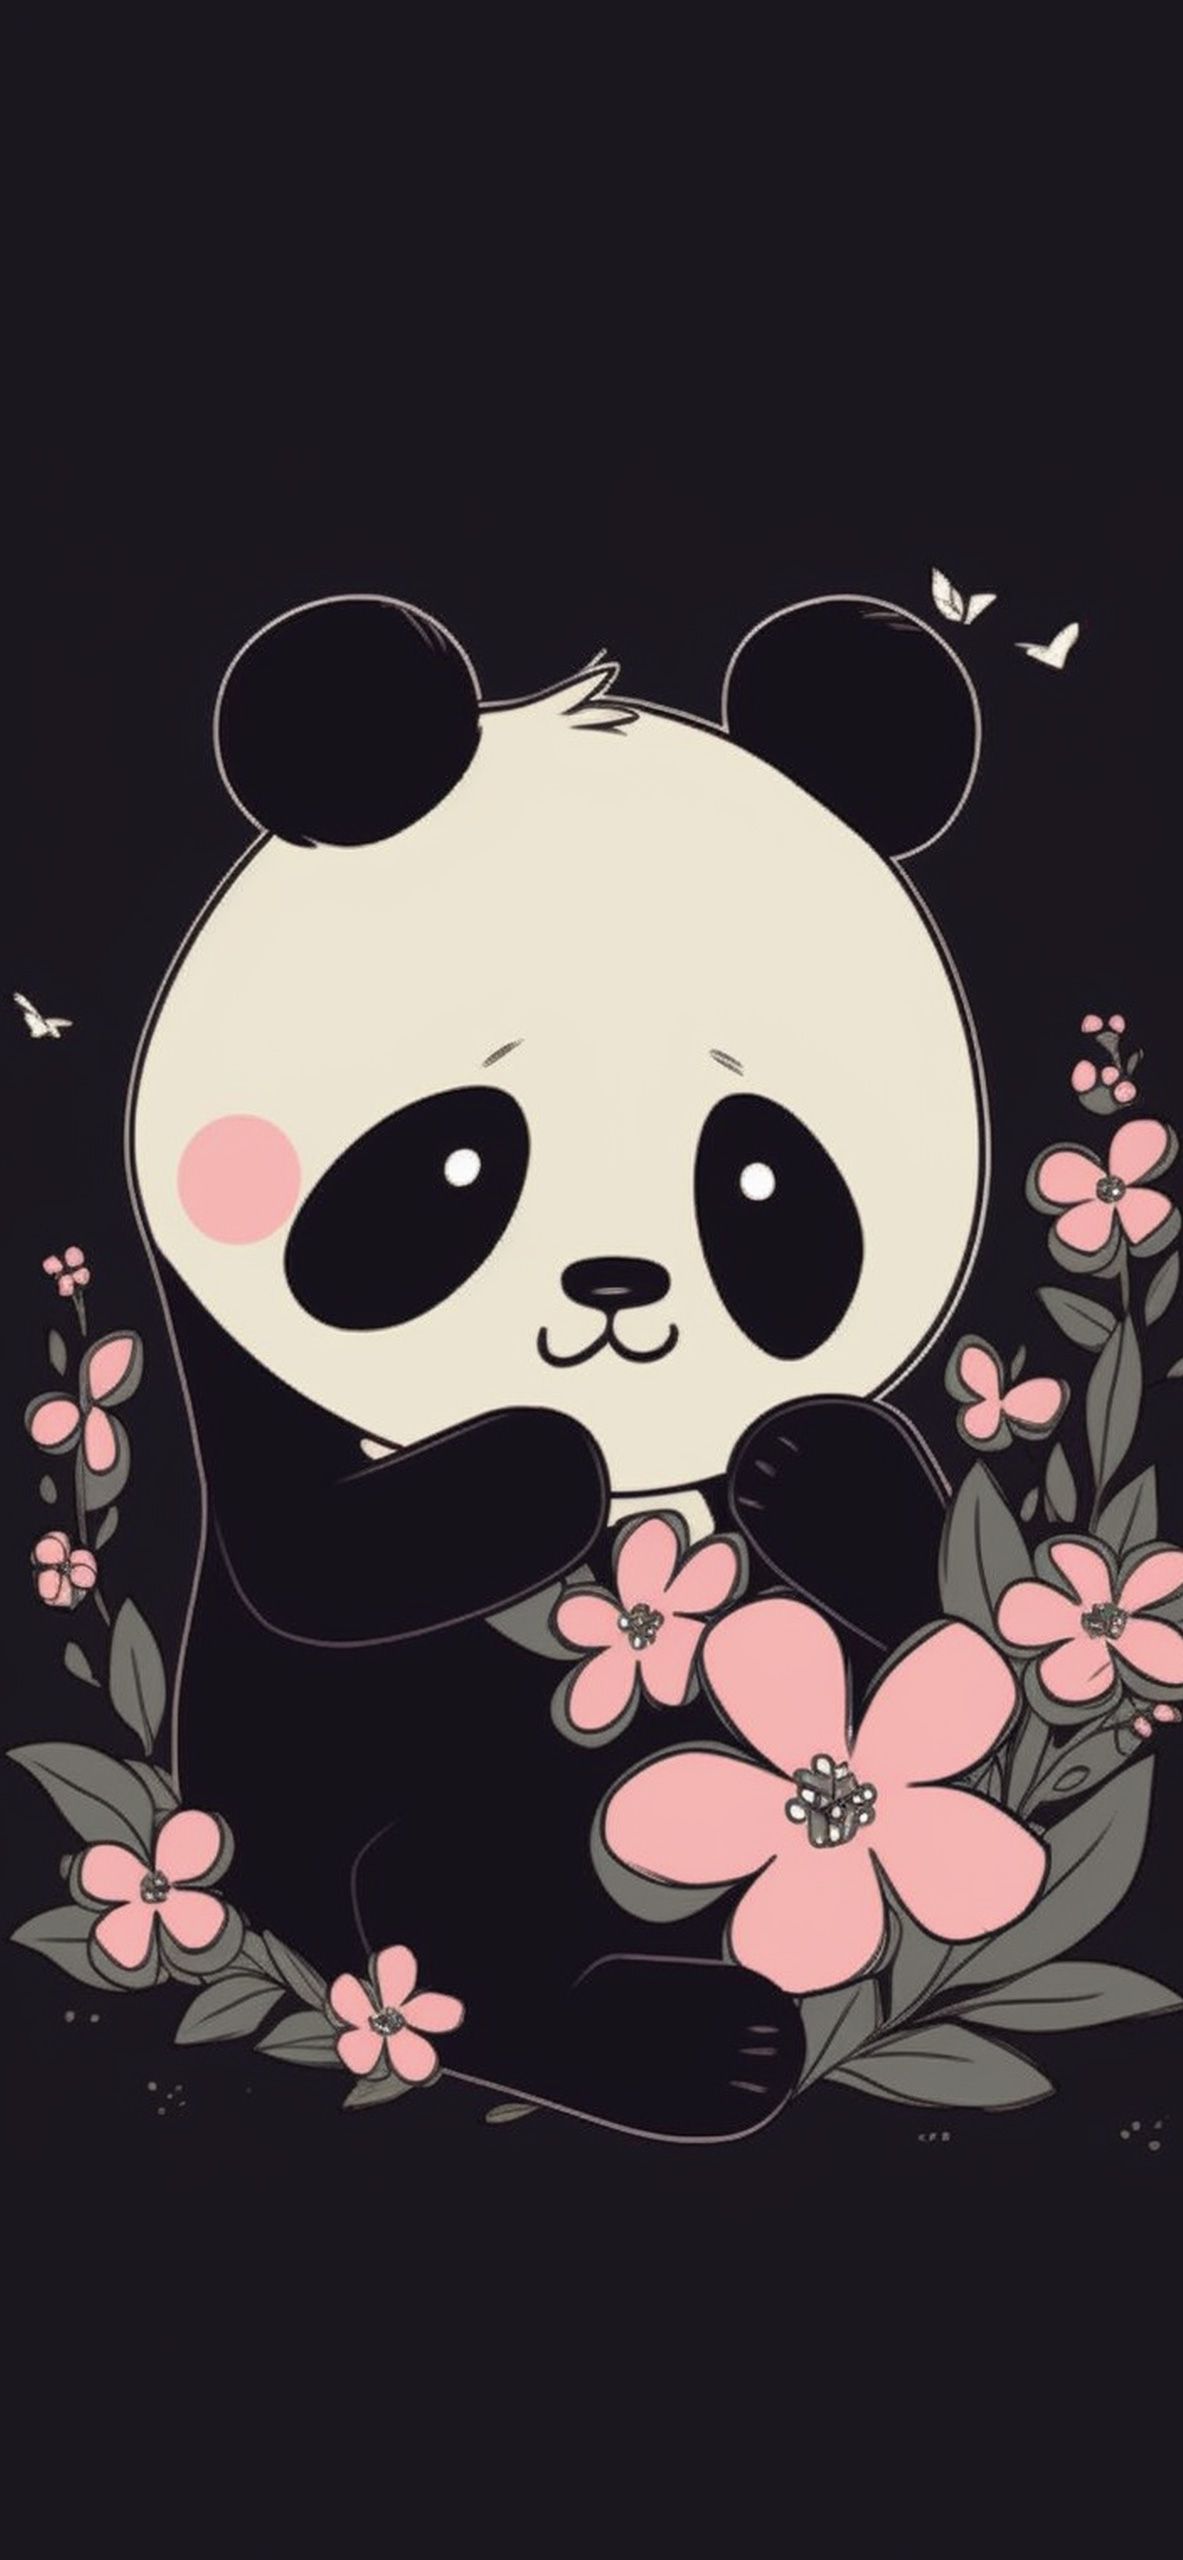 A black and white panda bear surrounded by pink flowers - Panda